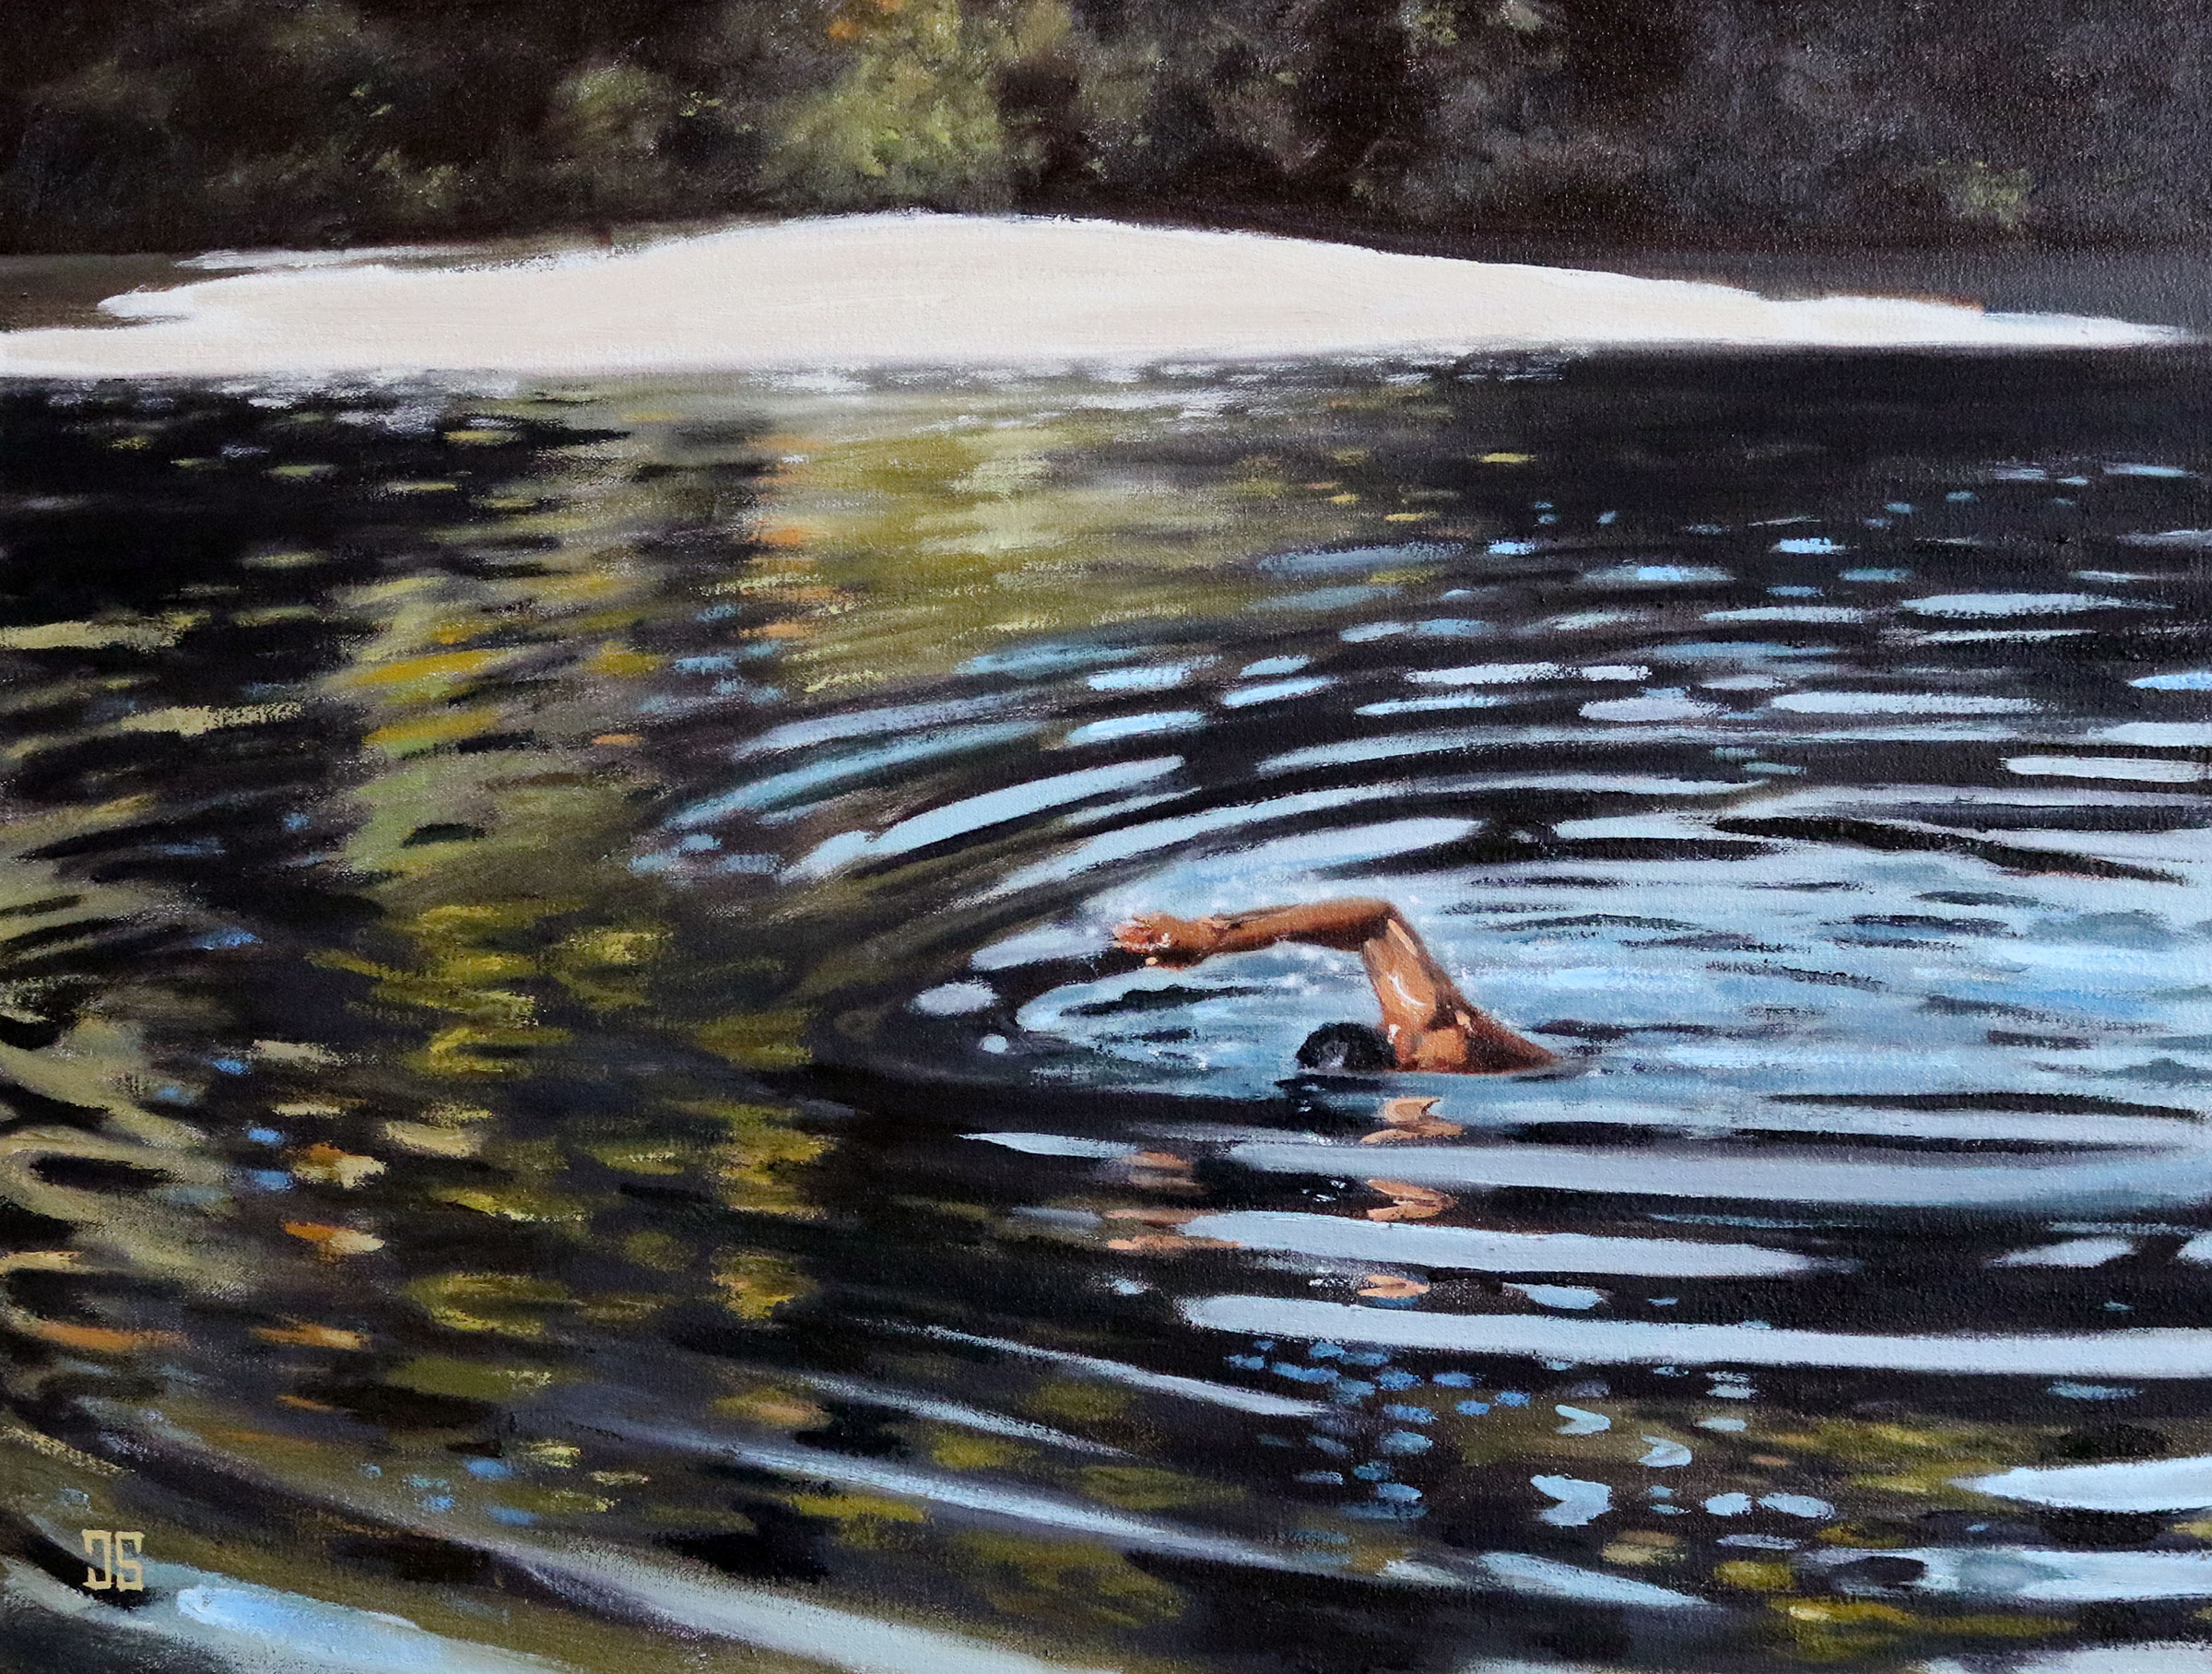 Oil painting "Early Morning Walden Pond Swimmer" by Jeffrey Dale Starr